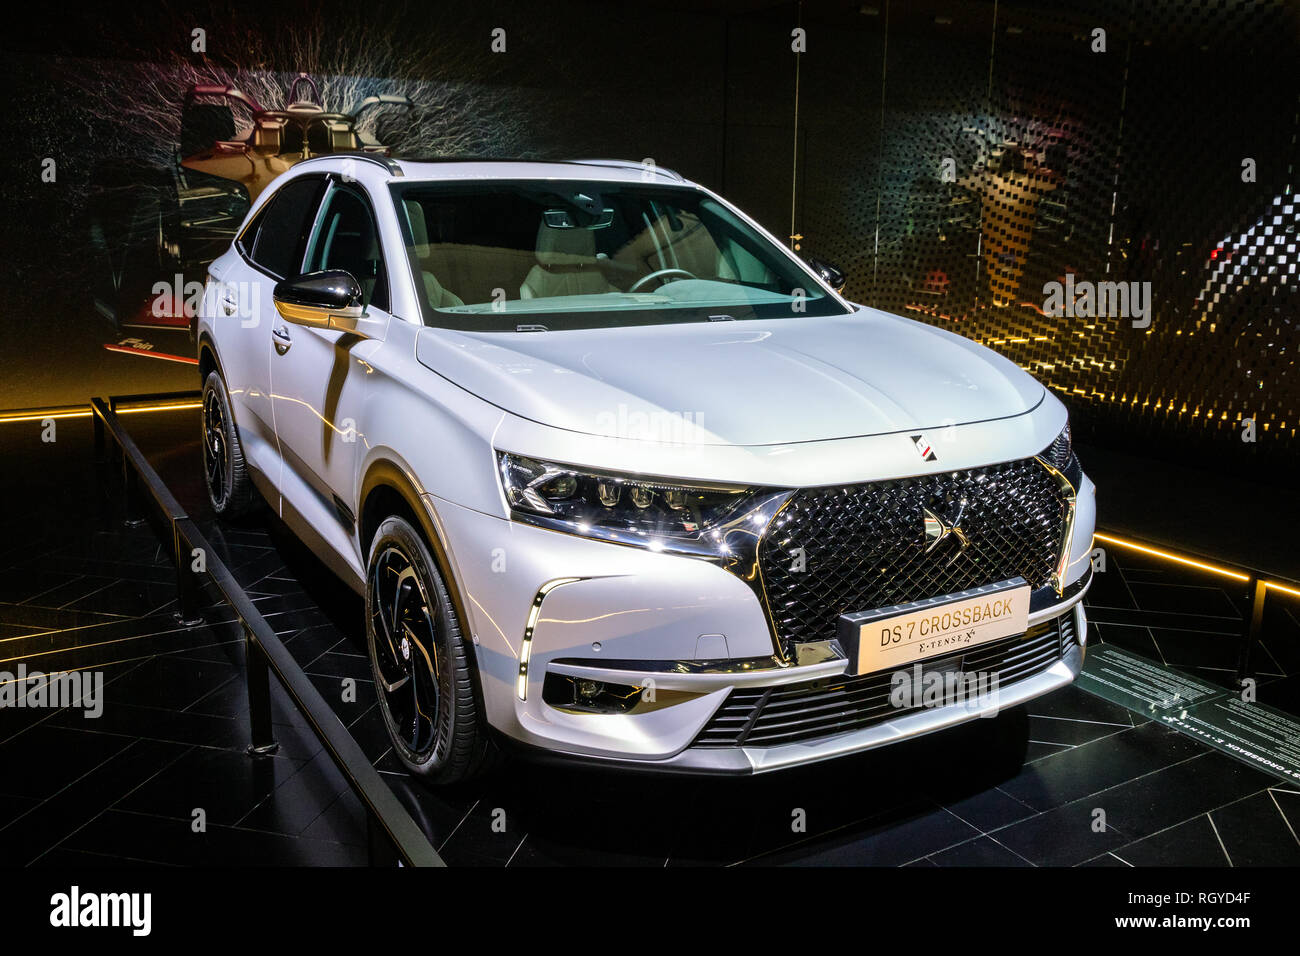 BRUSSELS - JAN 18, 2019: Citroen DS 7 Crossback E-Tense 4x4 car showcased at the 97th Brussels Motor Show 2019 Autosalon. Stock Photo